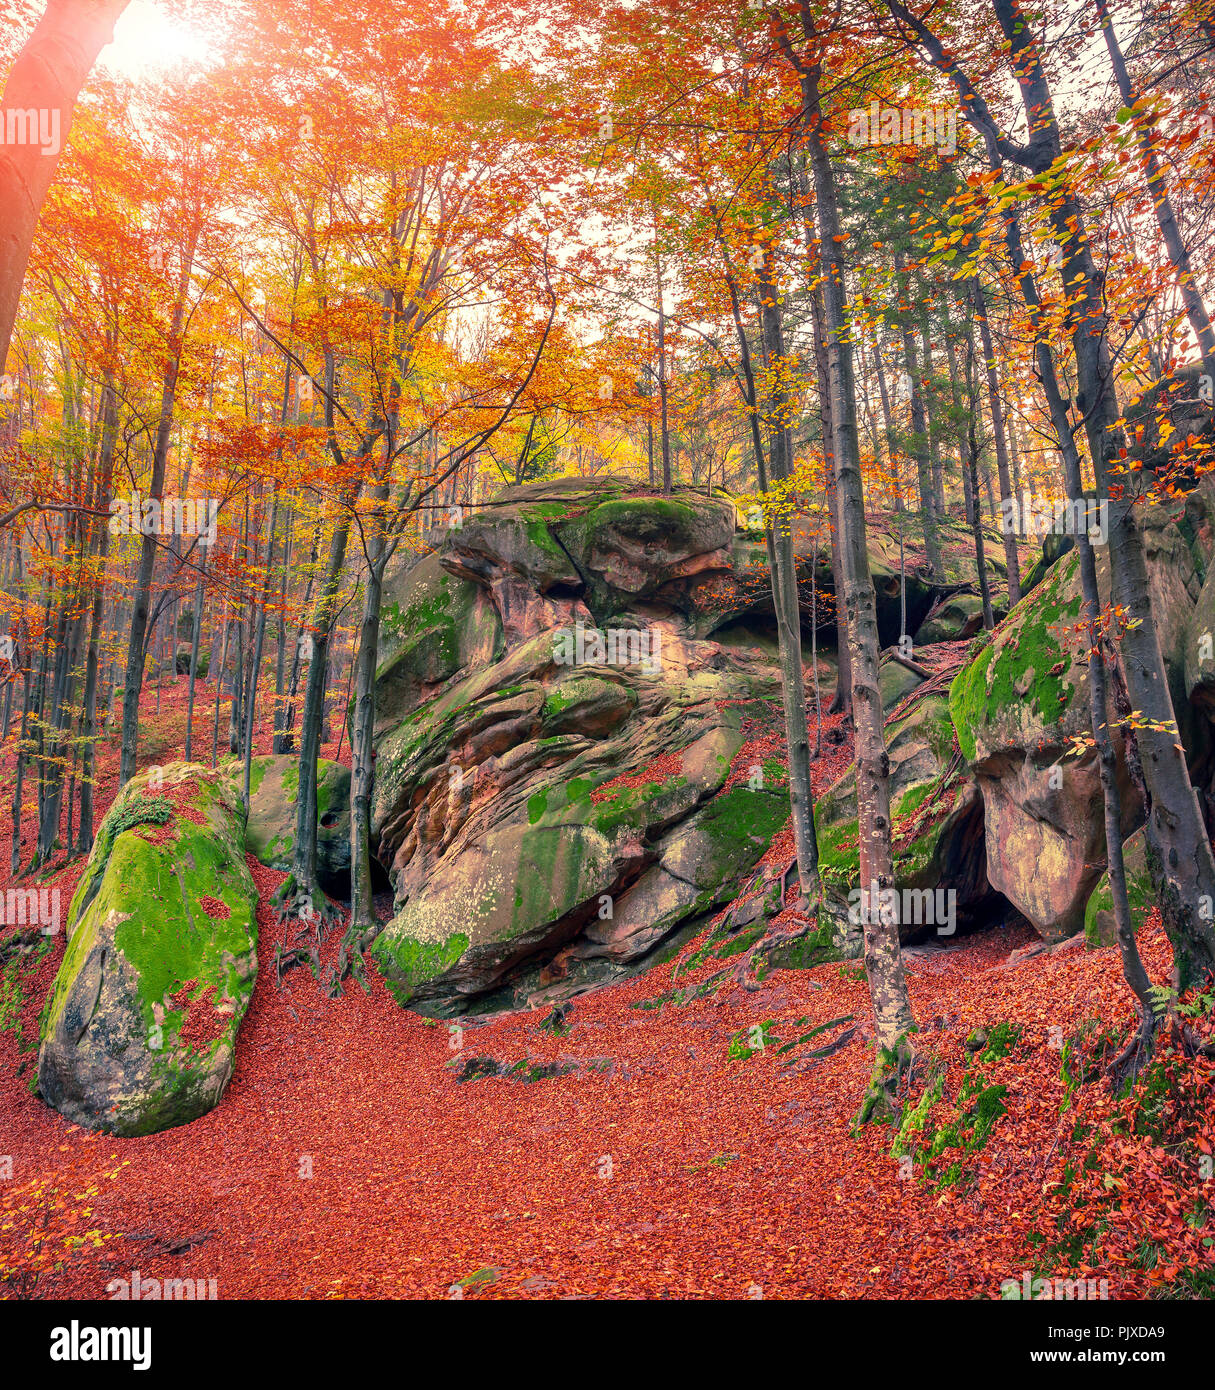 Huge rock in the autumn forest. Retro style. Stock Photo